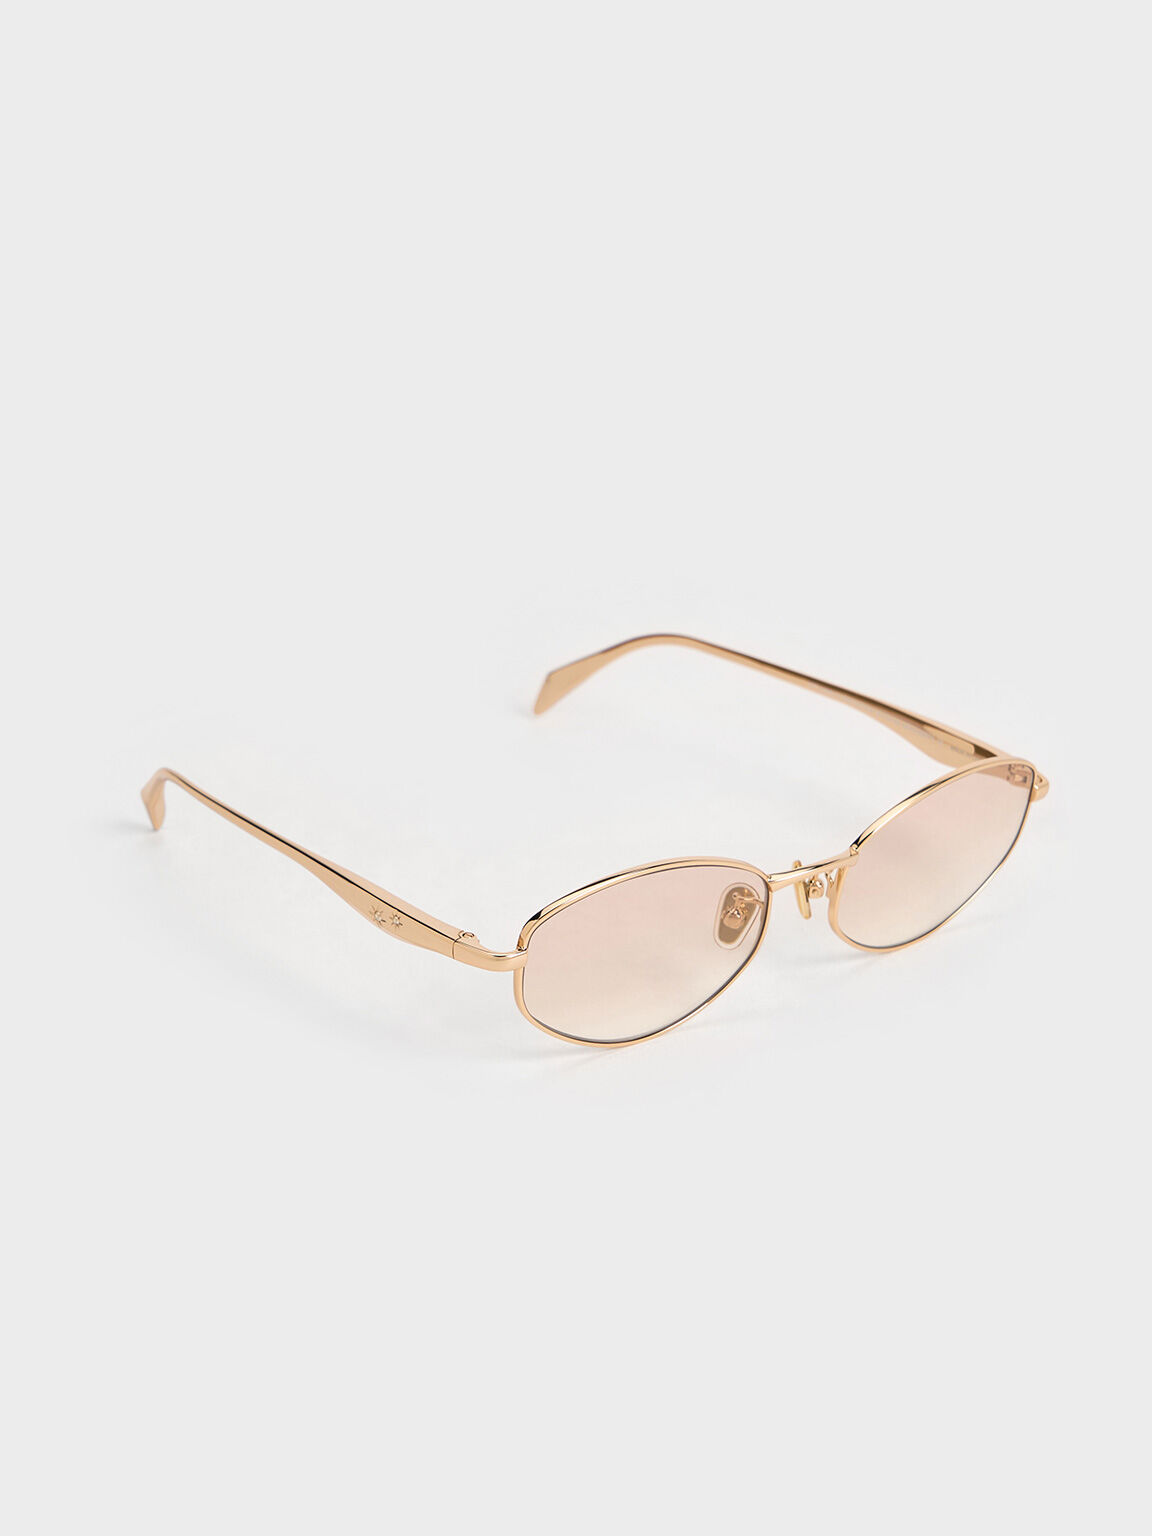 Crystal-Accent Oval Sunglasses, Gold, hi-res